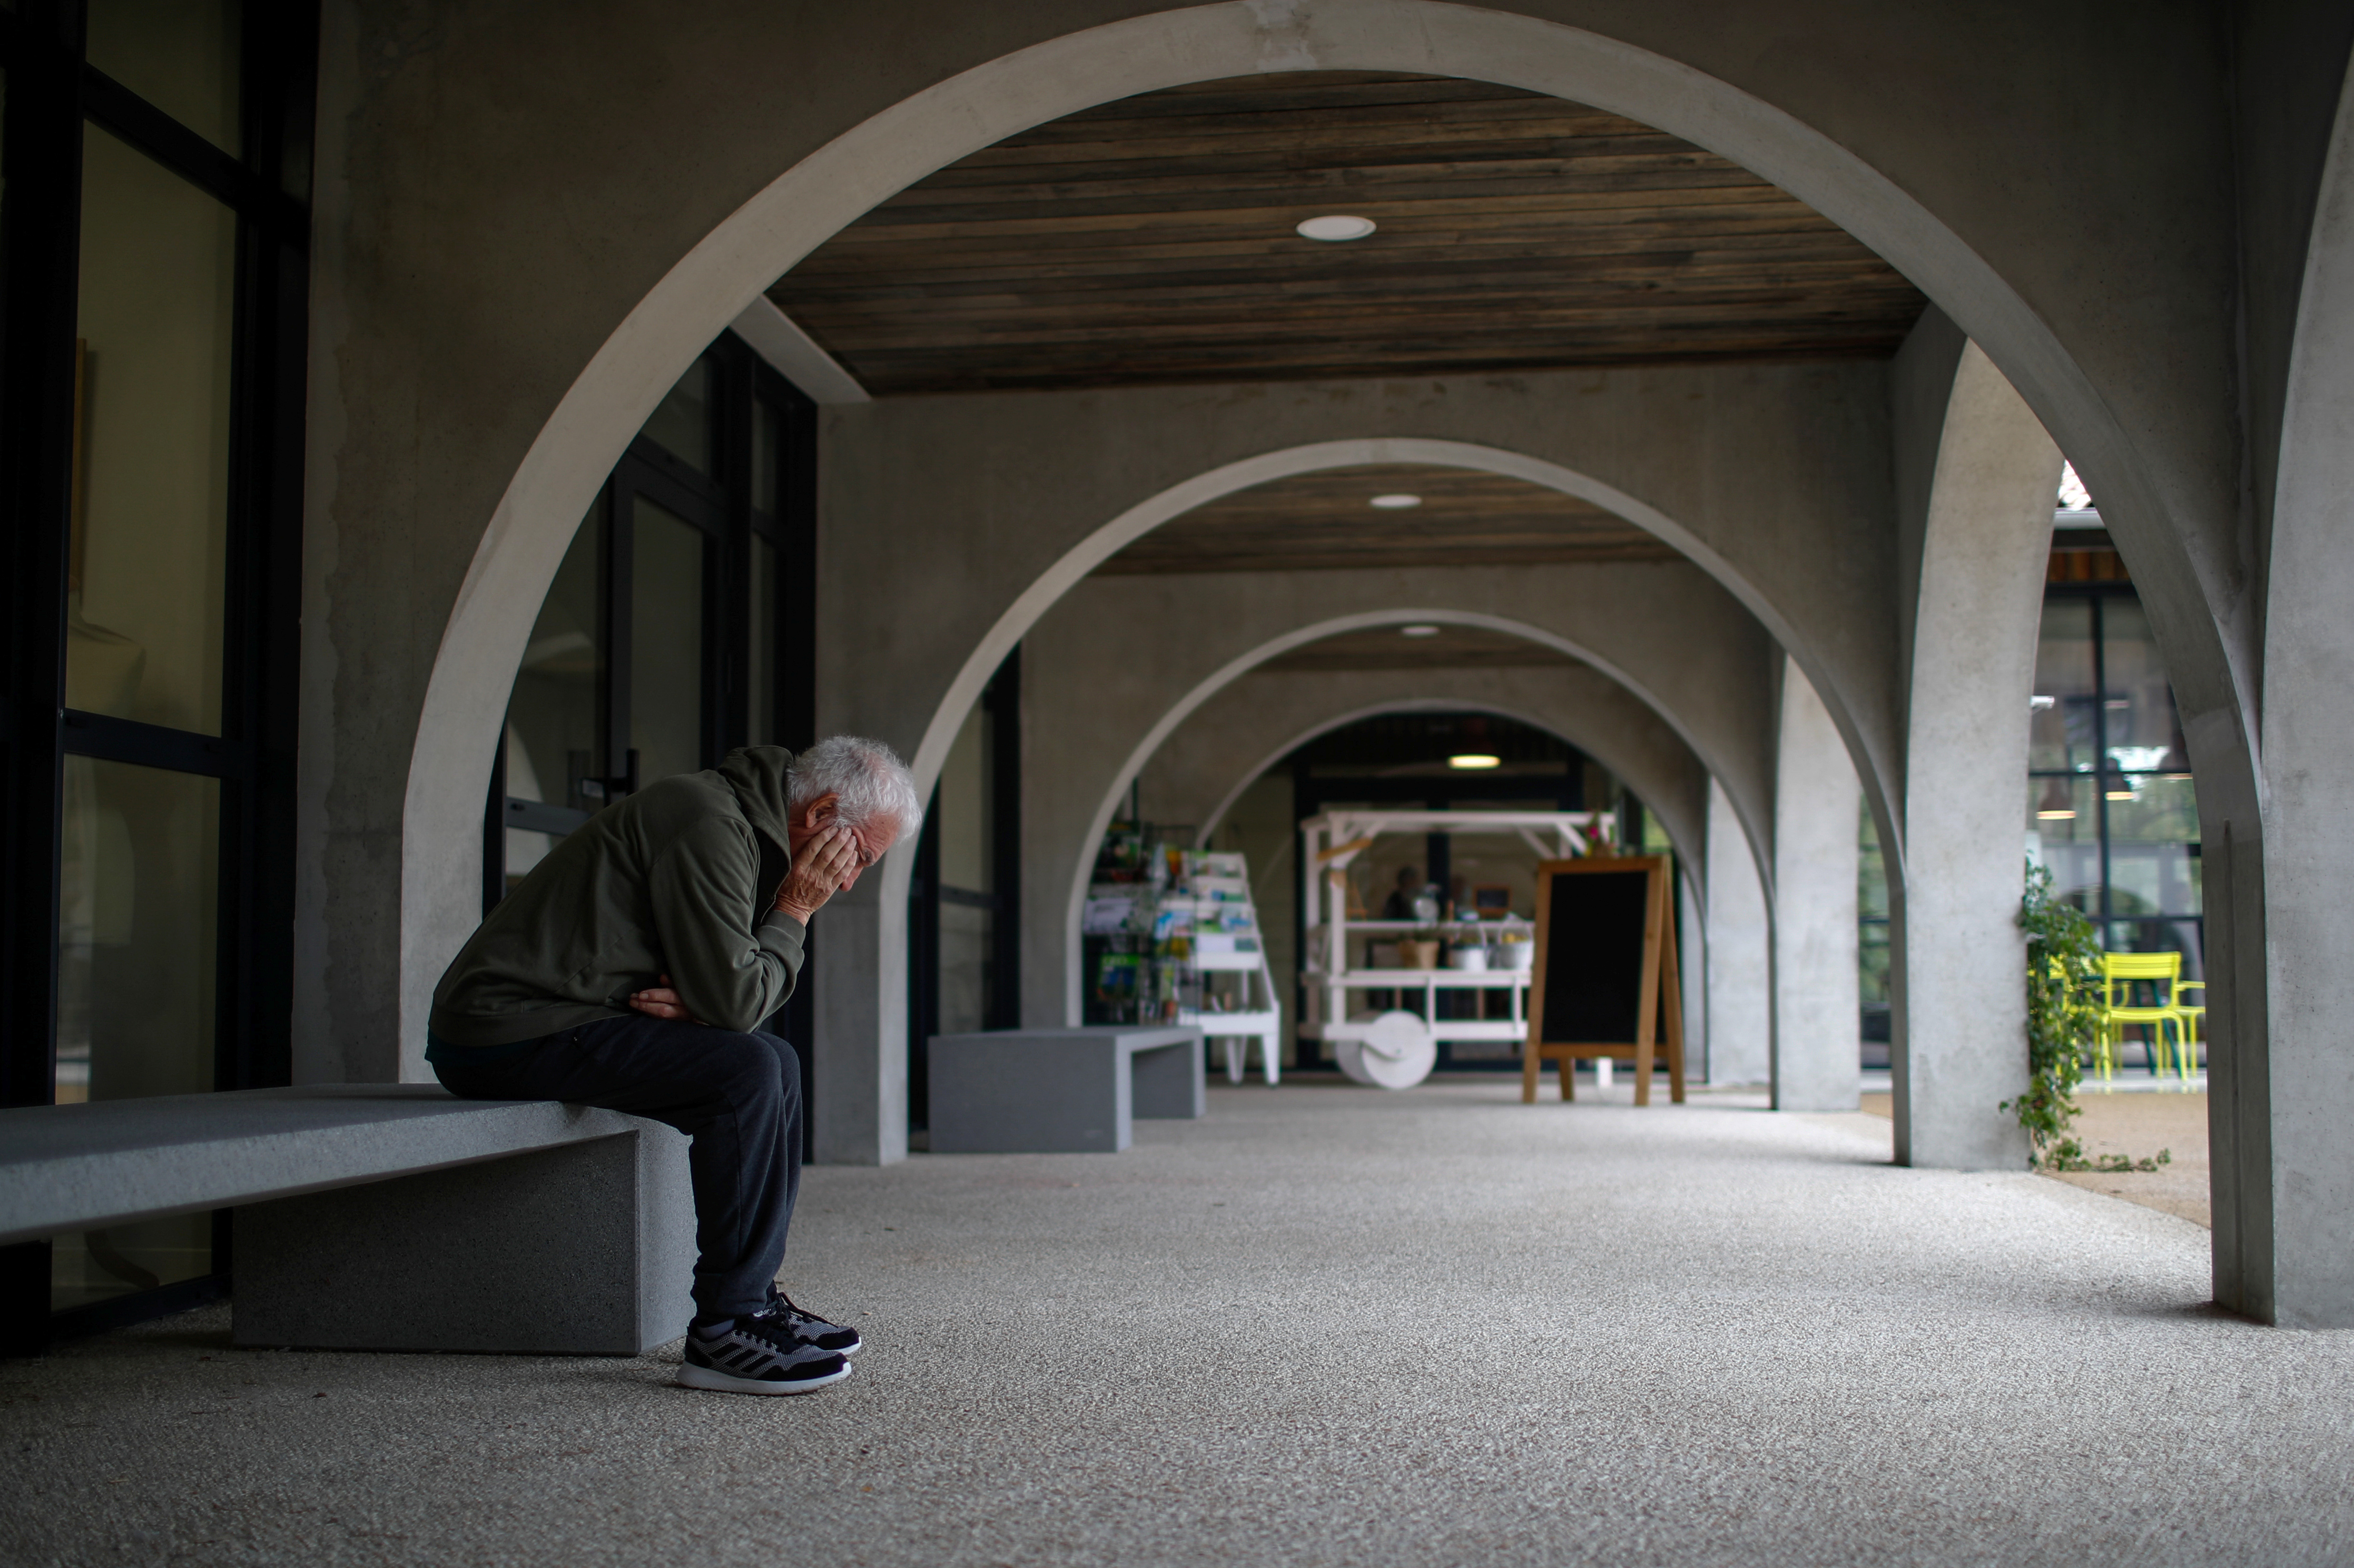 Inside the French village constructed for Alzheimer's patients